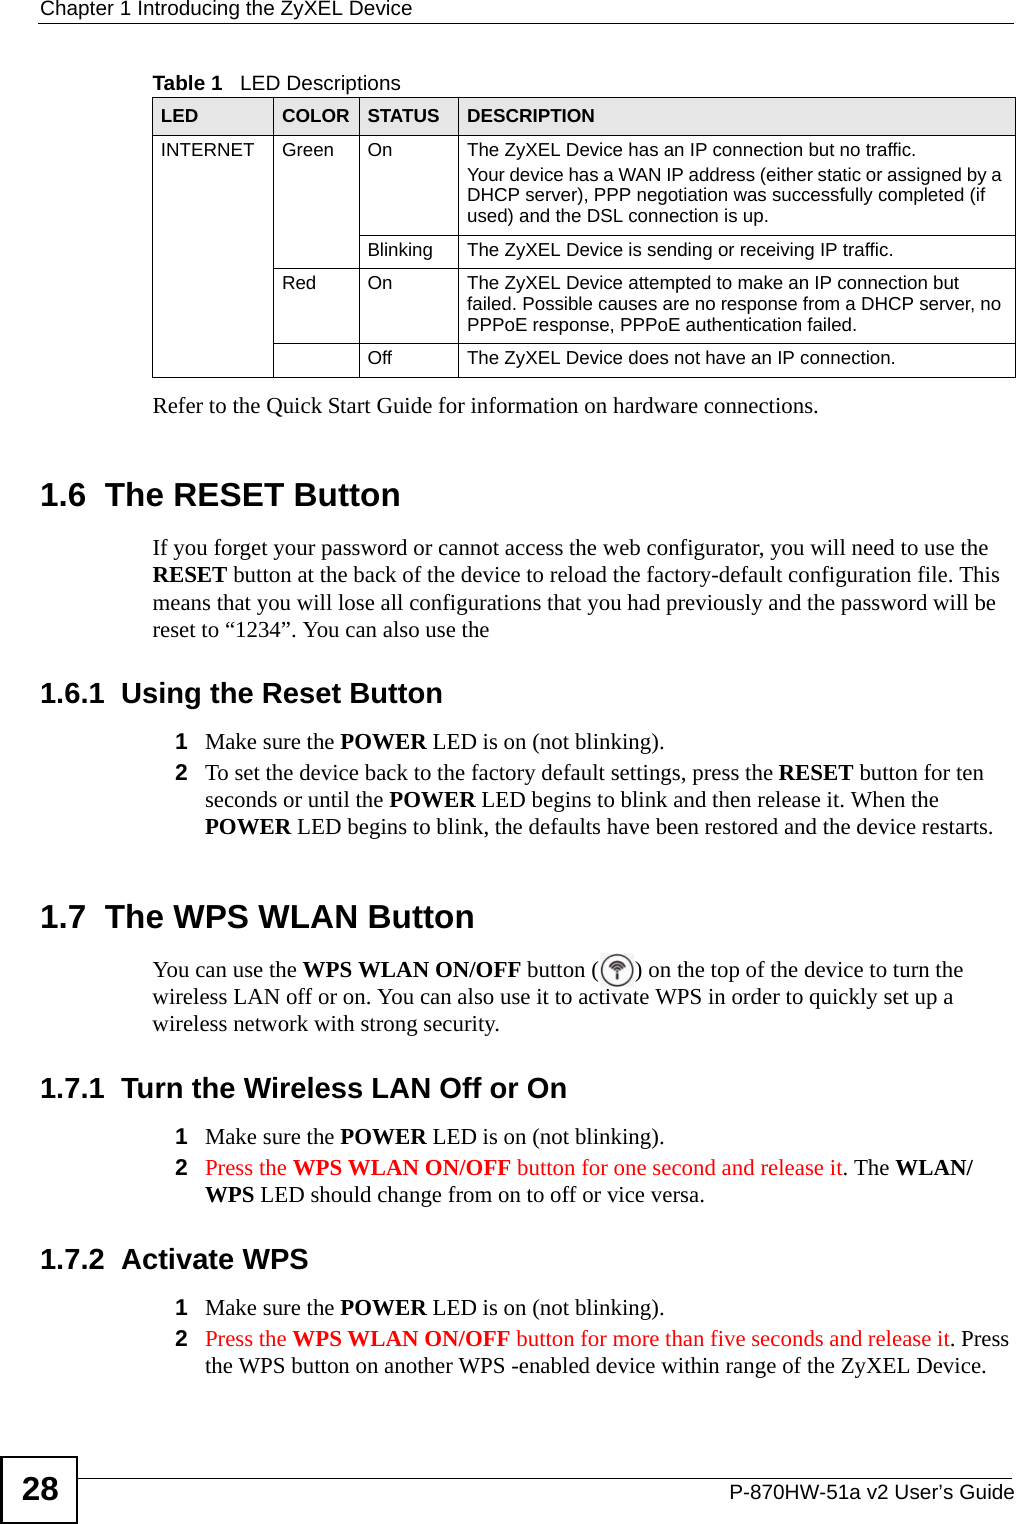 Chapter 1 Introducing the ZyXEL DeviceP-870HW-51a v2 User’s Guide28Refer to the Quick Start Guide for information on hardware connections. 1.6  The RESET ButtonIf you forget your password or cannot access the web configurator, you will need to use the RESET button at the back of the device to reload the factory-default configuration file. This means that you will lose all configurations that you had previously and the password will be reset to “1234”. You can also use the 1.6.1  Using the Reset Button1Make sure the POWER LED is on (not blinking).2To set the device back to the factory default settings, press the RESET button for ten seconds or until the POWER LED begins to blink and then release it. When the POWER LED begins to blink, the defaults have been restored and the device restarts.1.7  The WPS WLAN ButtonYou can use the WPS WLAN ON/OFF button ( ) on the top of the device to turn the wireless LAN off or on. You can also use it to activate WPS in order to quickly set up a wireless network with strong security. 1.7.1  Turn the Wireless LAN Off or On1Make sure the POWER LED is on (not blinking).2Press the WPS WLAN ON/OFF button for one second and release it. The WLAN/WPS LED should change from on to off or vice versa. 1.7.2  Activate WPS1Make sure the POWER LED is on (not blinking).2Press the WPS WLAN ON/OFF button for more than five seconds and release it. Press the WPS button on another WPS -enabled device within range of the ZyXEL Device. INTERNET Green On The ZyXEL Device has an IP connection but no traffic.Your device has a WAN IP address (either static or assigned by a DHCP server), PPP negotiation was successfully completed (if used) and the DSL connection is up.Blinking The ZyXEL Device is sending or receiving IP traffic.Red On The ZyXEL Device attempted to make an IP connection but failed. Possible causes are no response from a DHCP server, no PPPoE response, PPPoE authentication failed.Off The ZyXEL Device does not have an IP connection.Table 1   LED DescriptionsLED COLOR STATUS DESCRIPTION